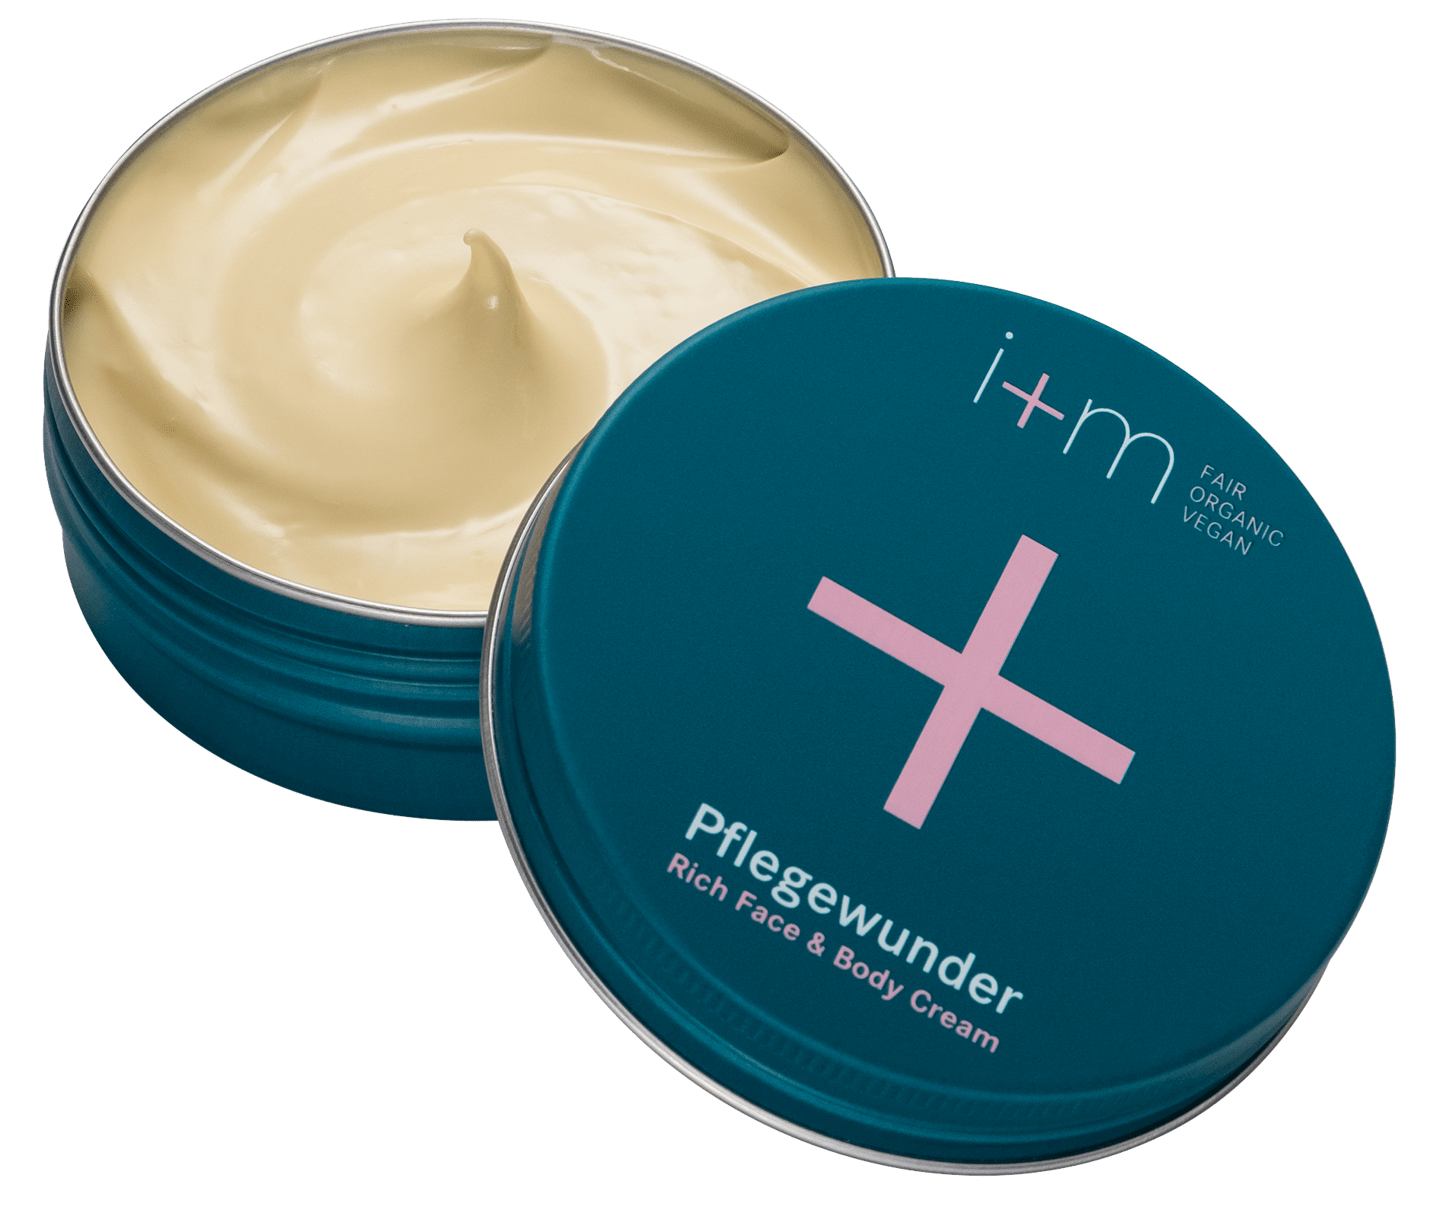 i+m - Special Care Pflegewunder Rich Face & Body Cream, 75 ml